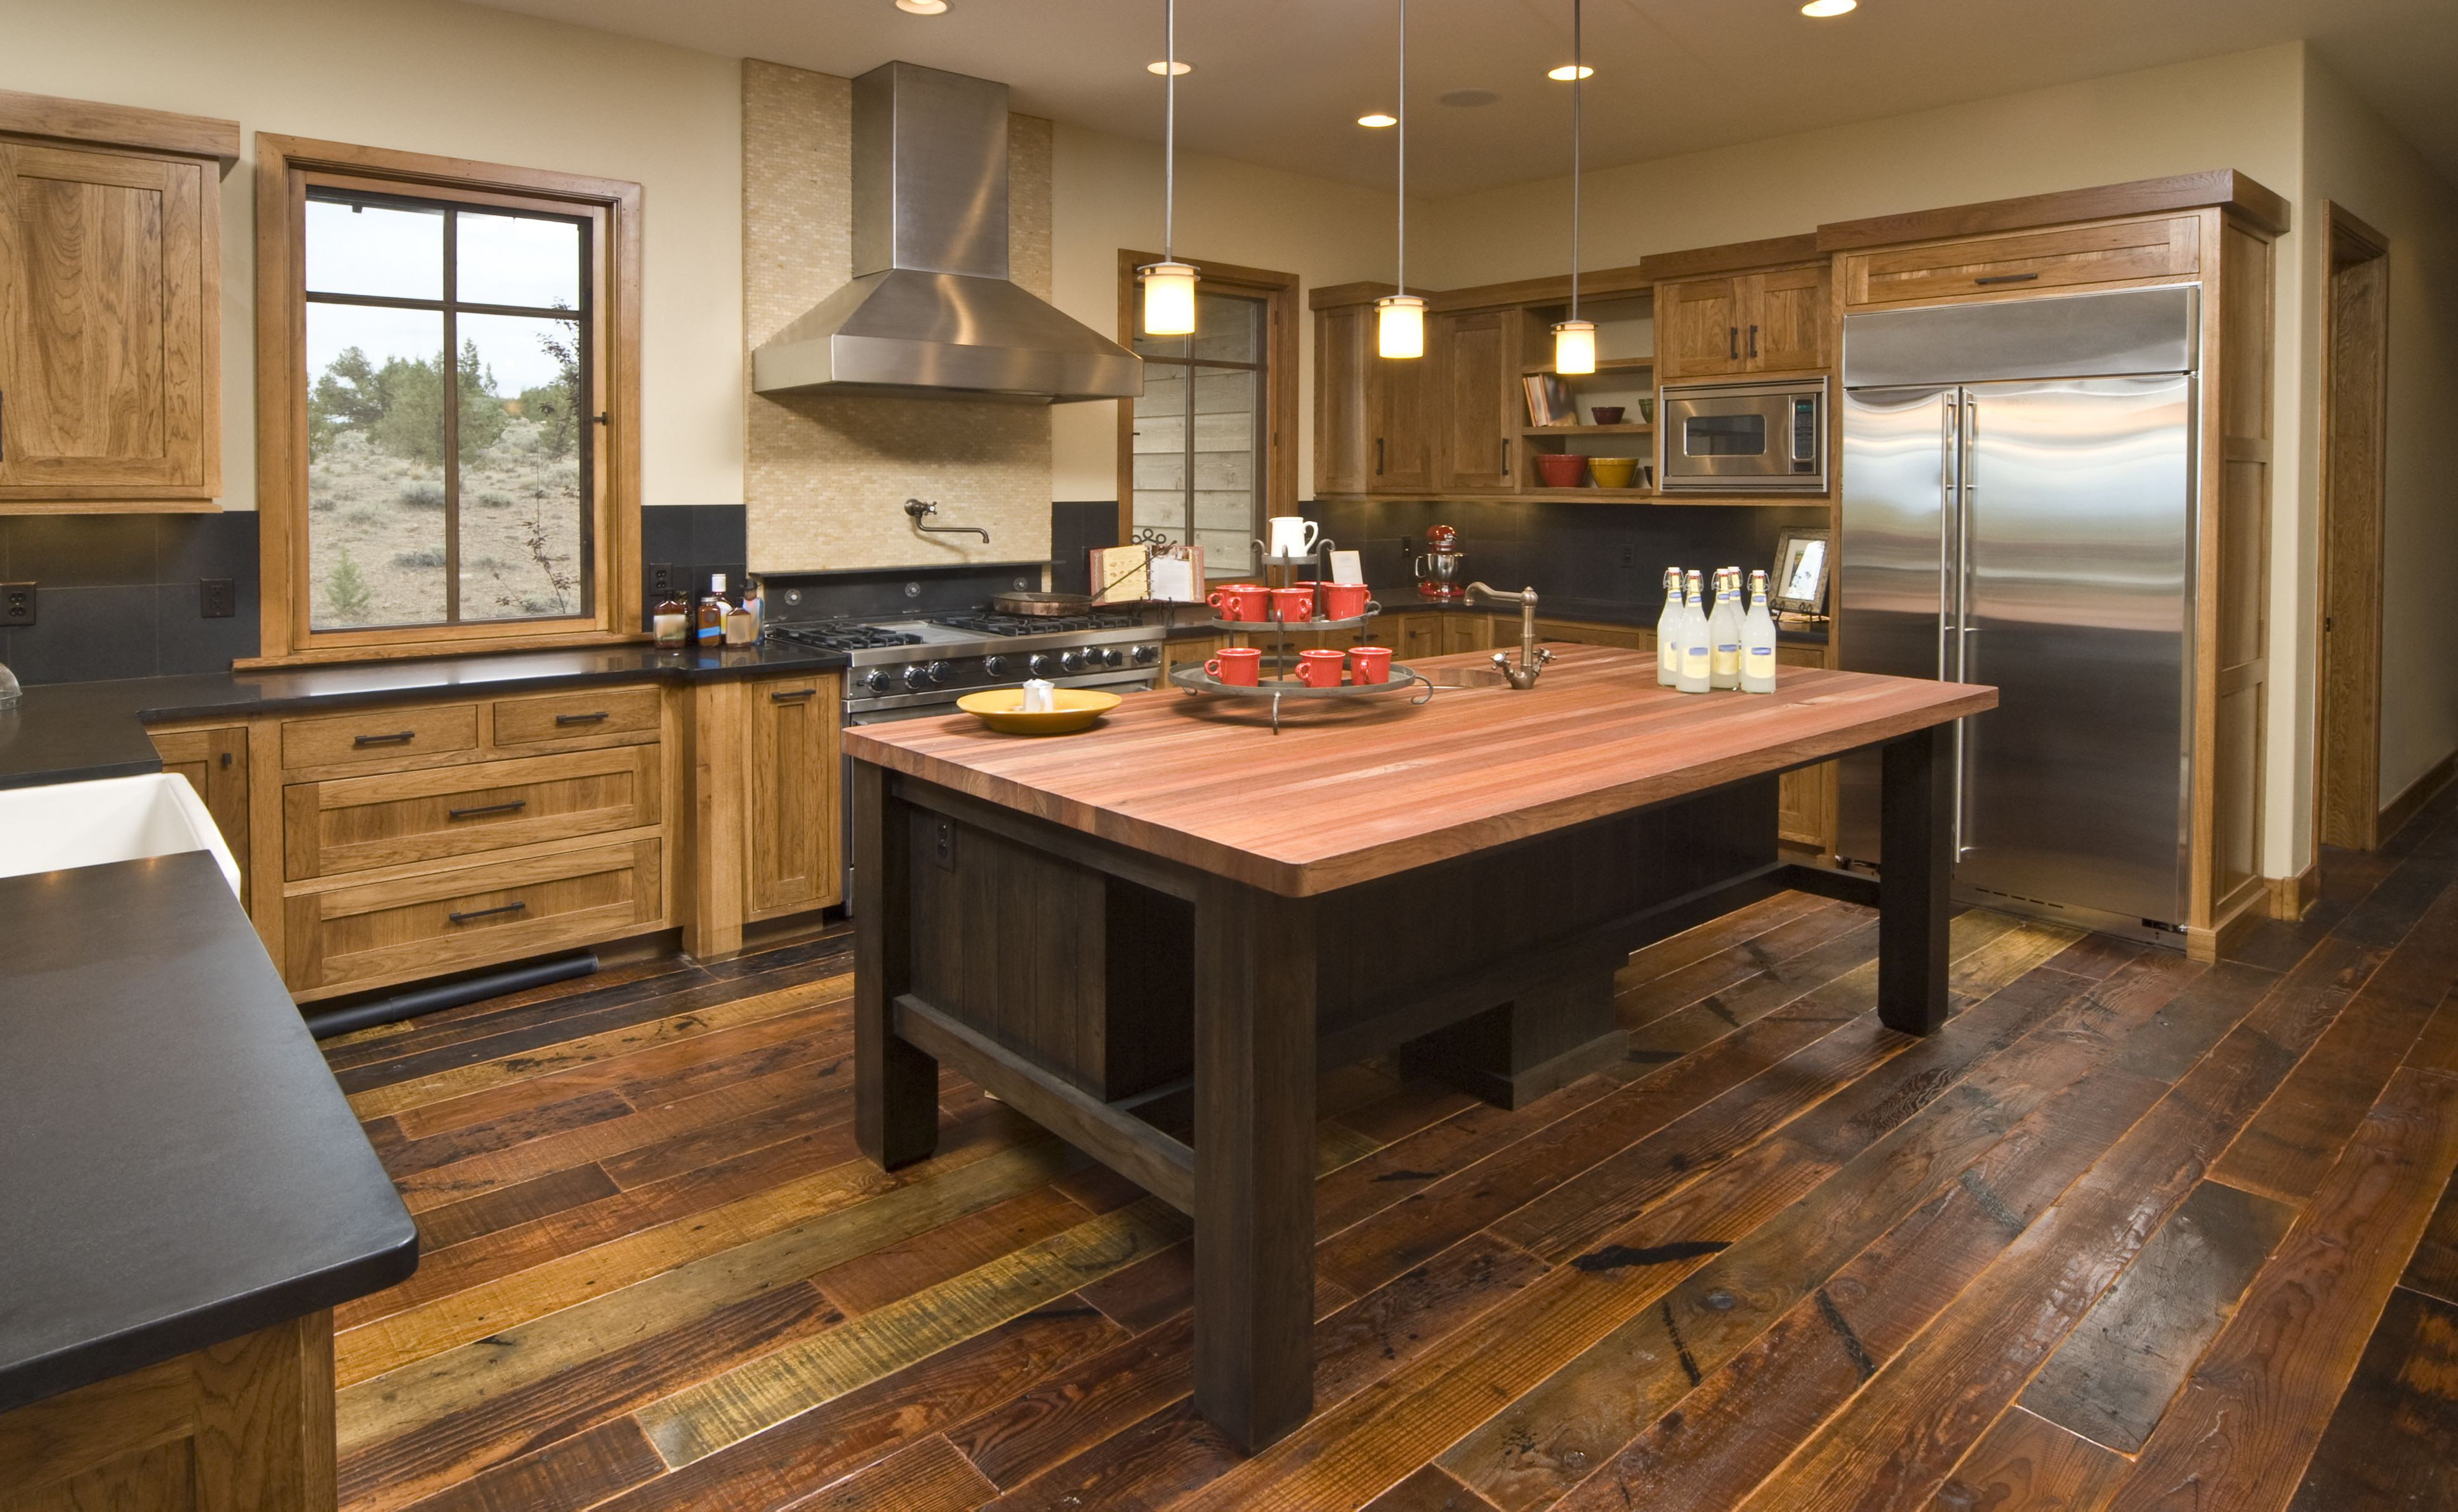 Hardwood Flooring Black Friday Sale Of where to Buy Reclaimed Wood Flooring within Rustic Modern Kitchen 157565456 58ae76a73df78c345ba2f5d1